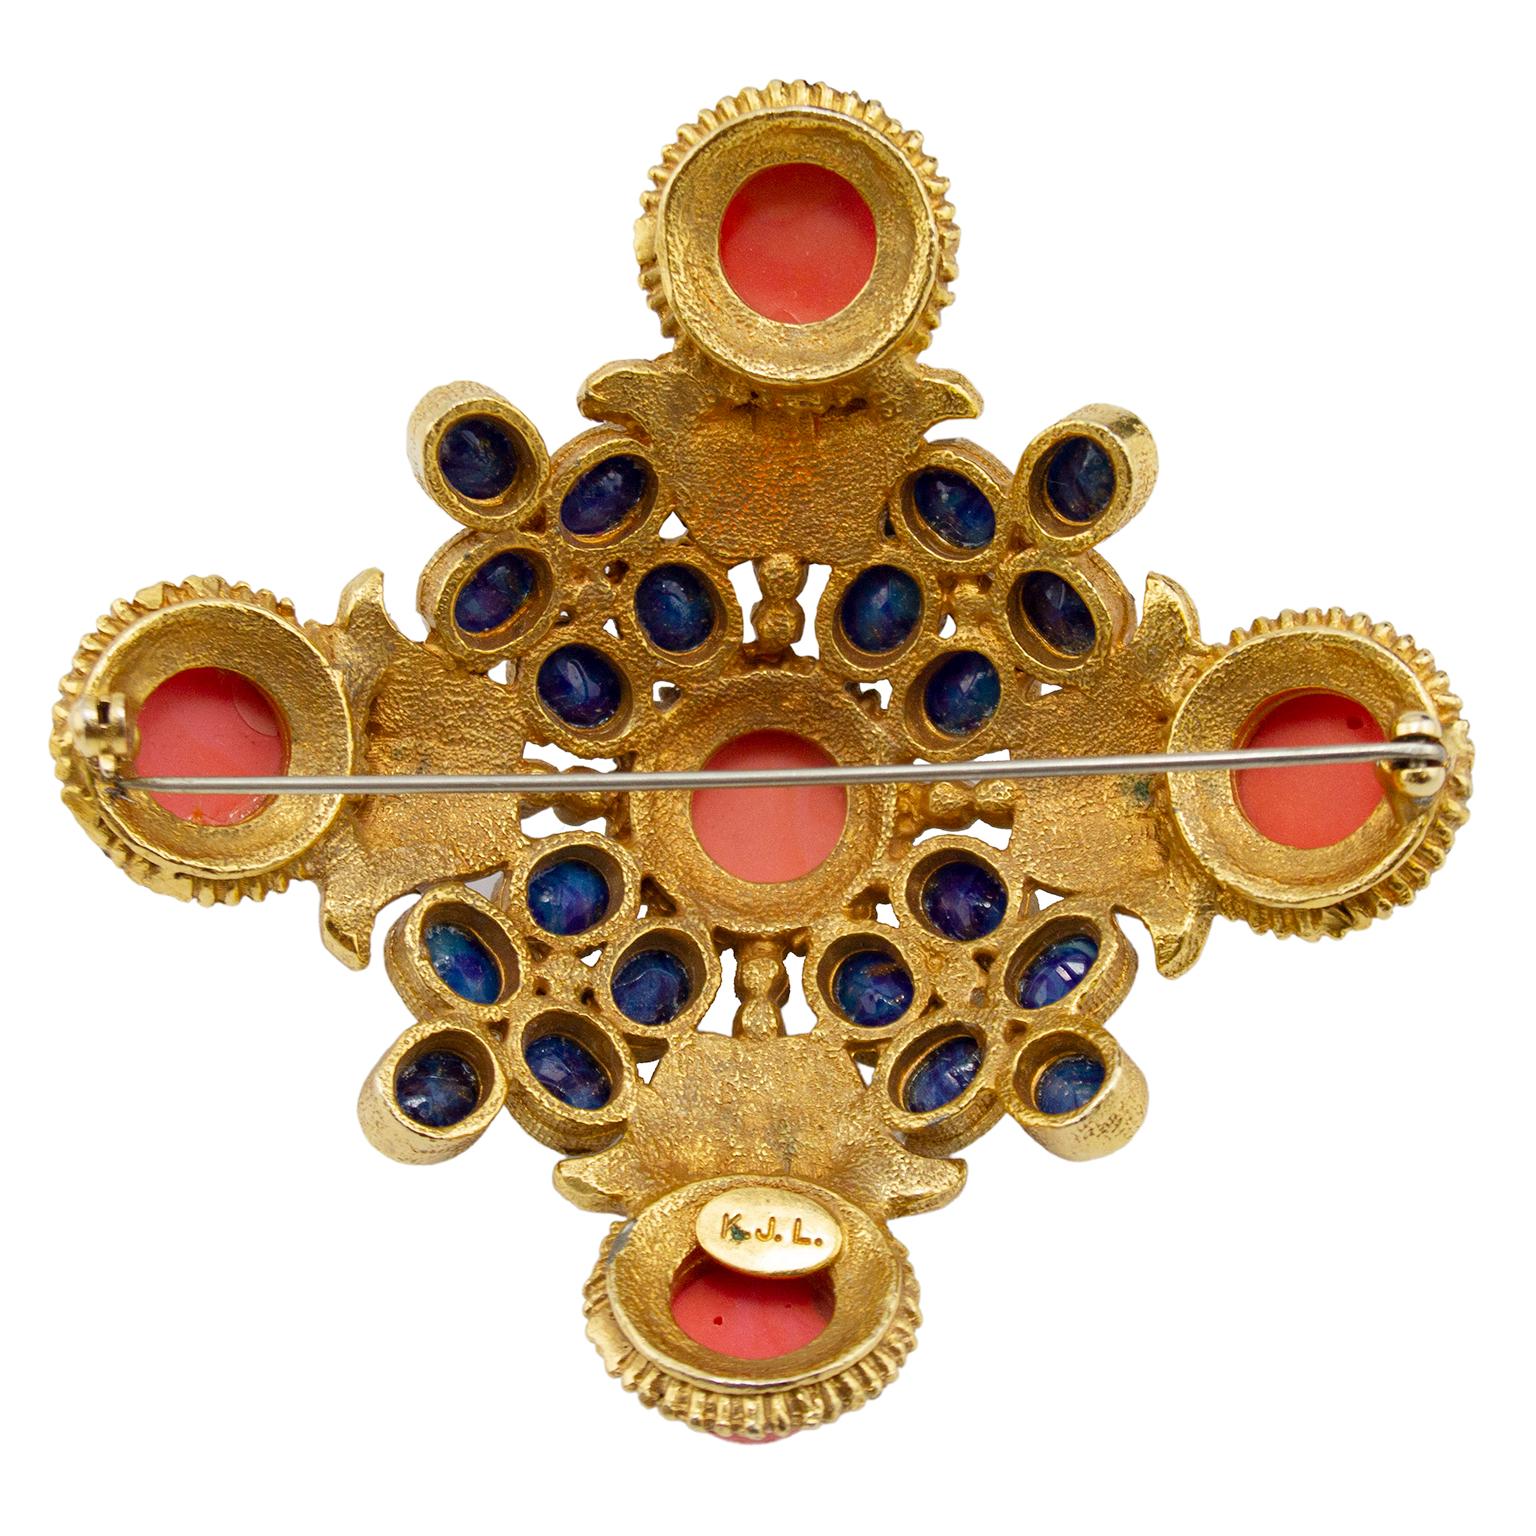 Possibly 1960's  or 1980's version of large Maltese cross style pin featuring faux coral and faux lapis cabochons, encrusted in rhinestones set in antiqued gold plated metal. Pin closure. Signature on the back K.J.L. with no copyright symbol leads